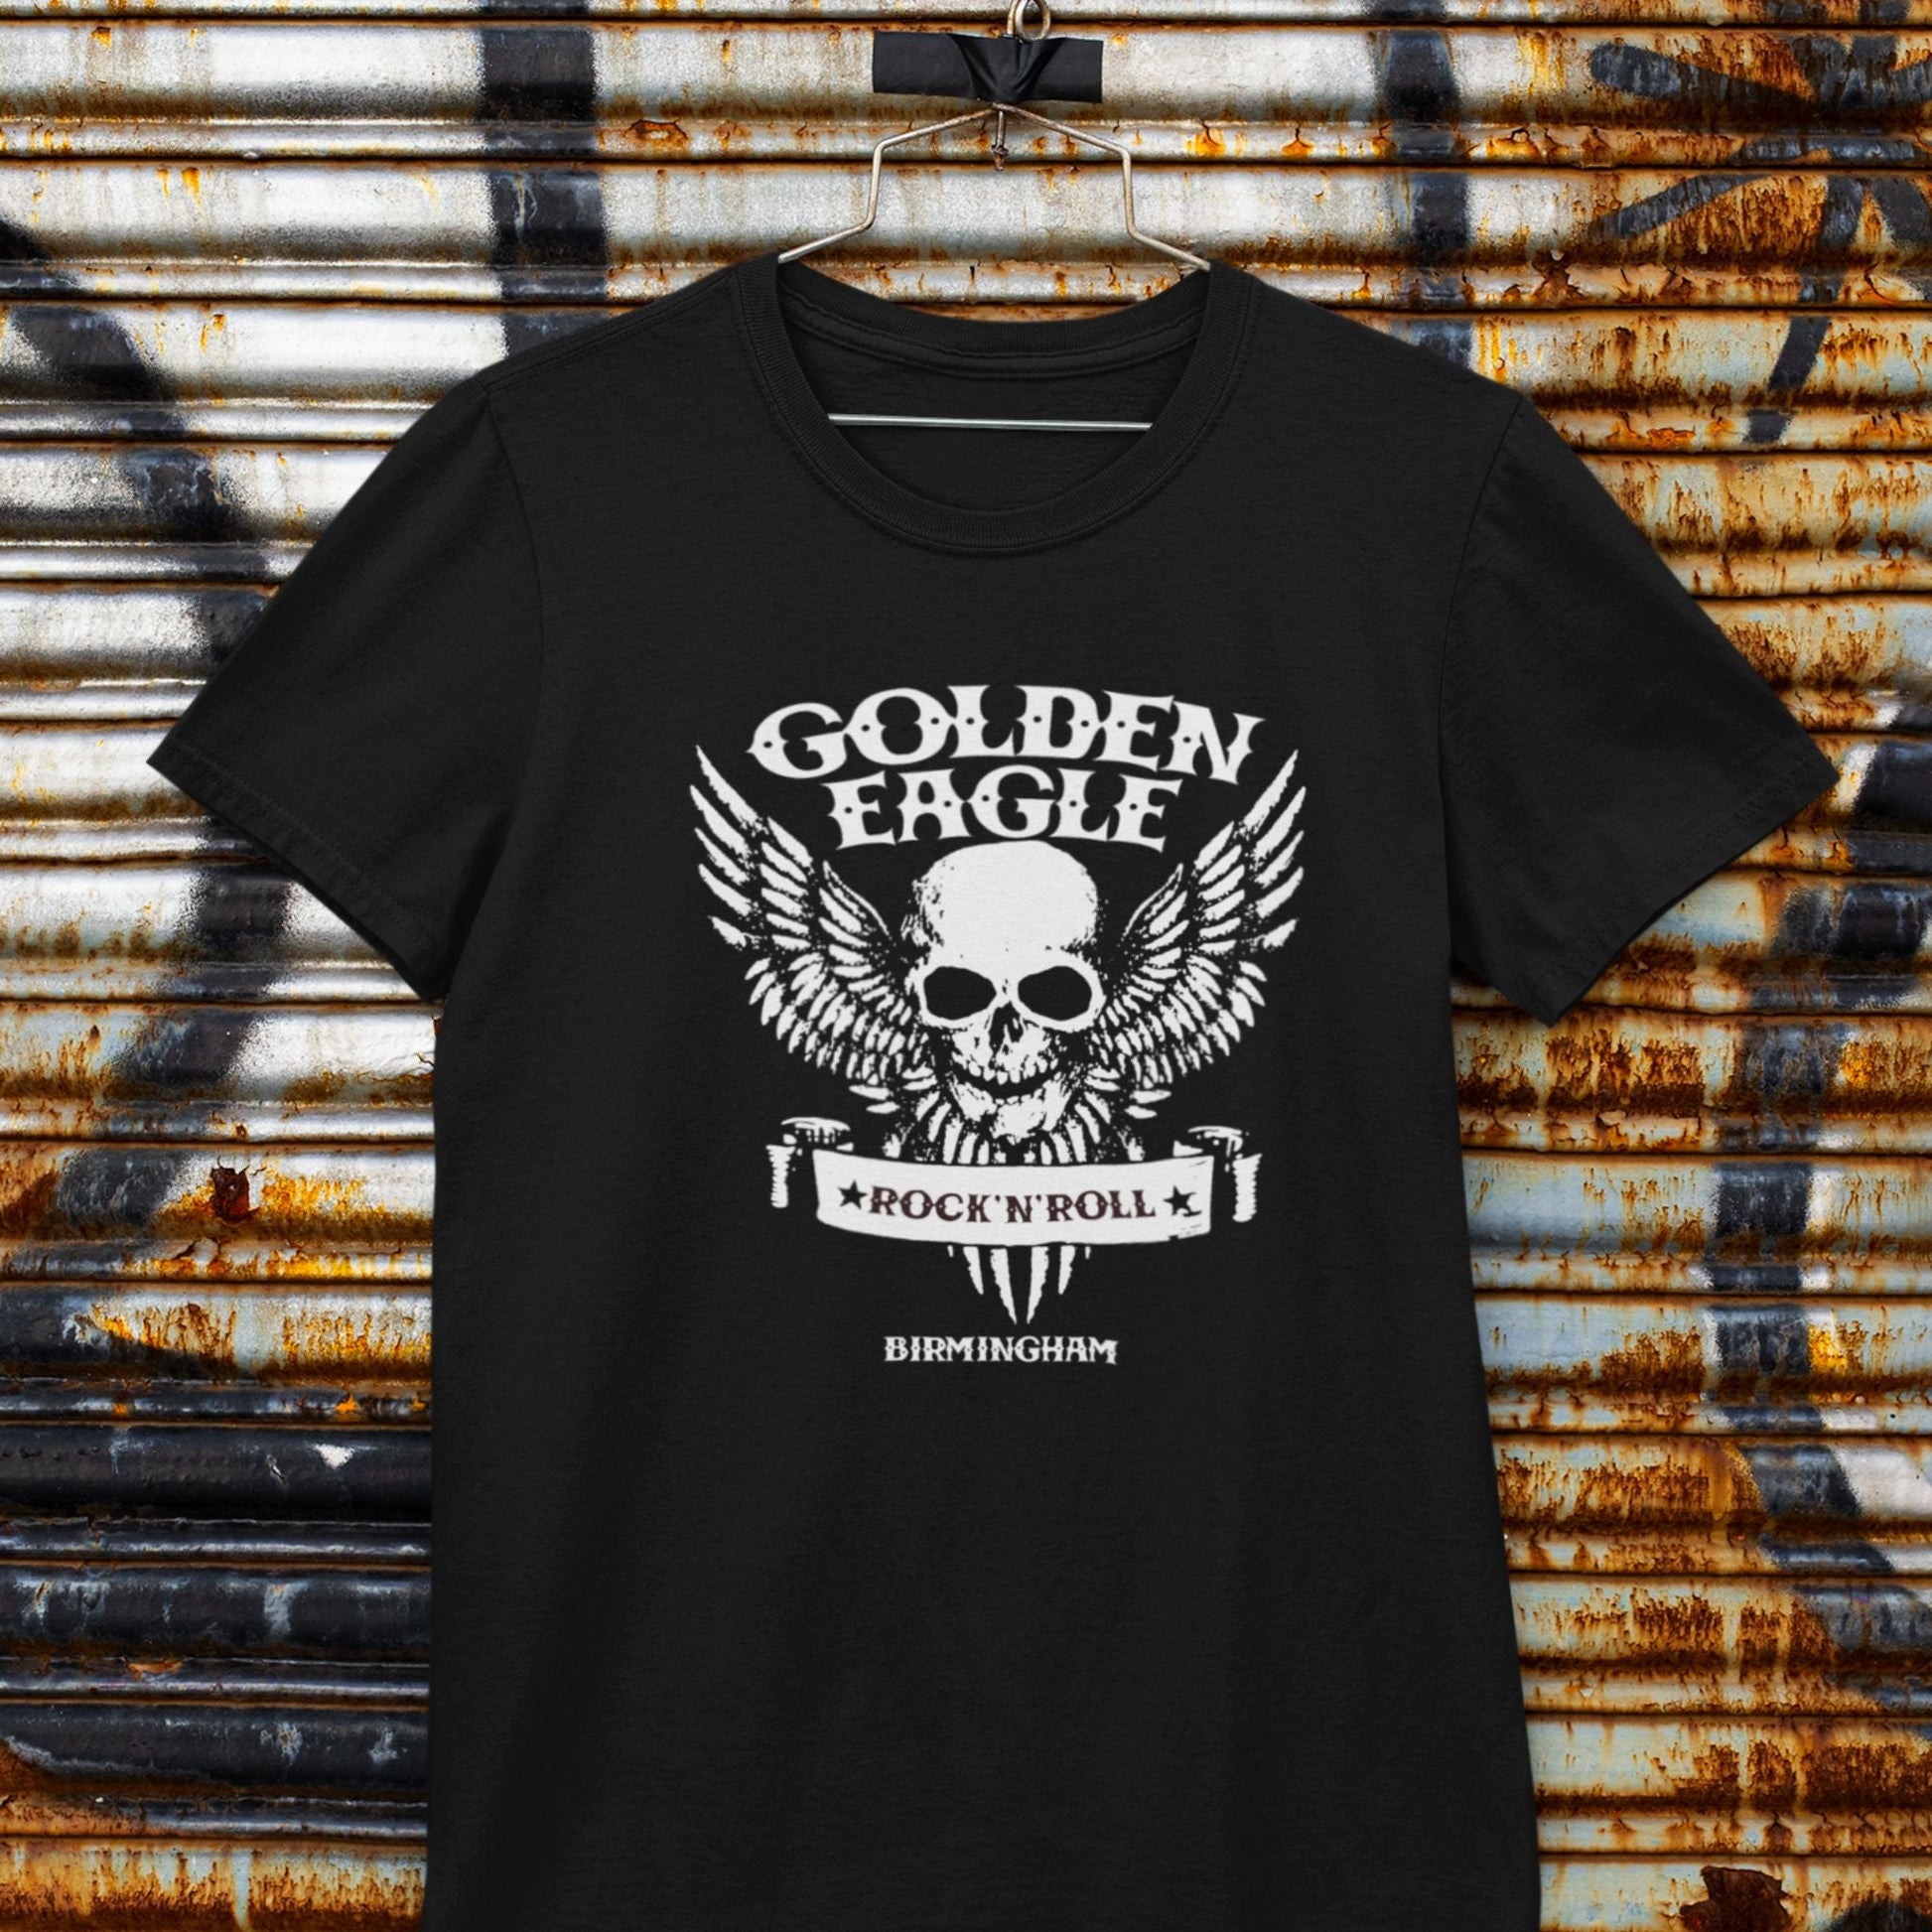 Golden Eagle skull/wings T-shirt - Dirty Stop Outs